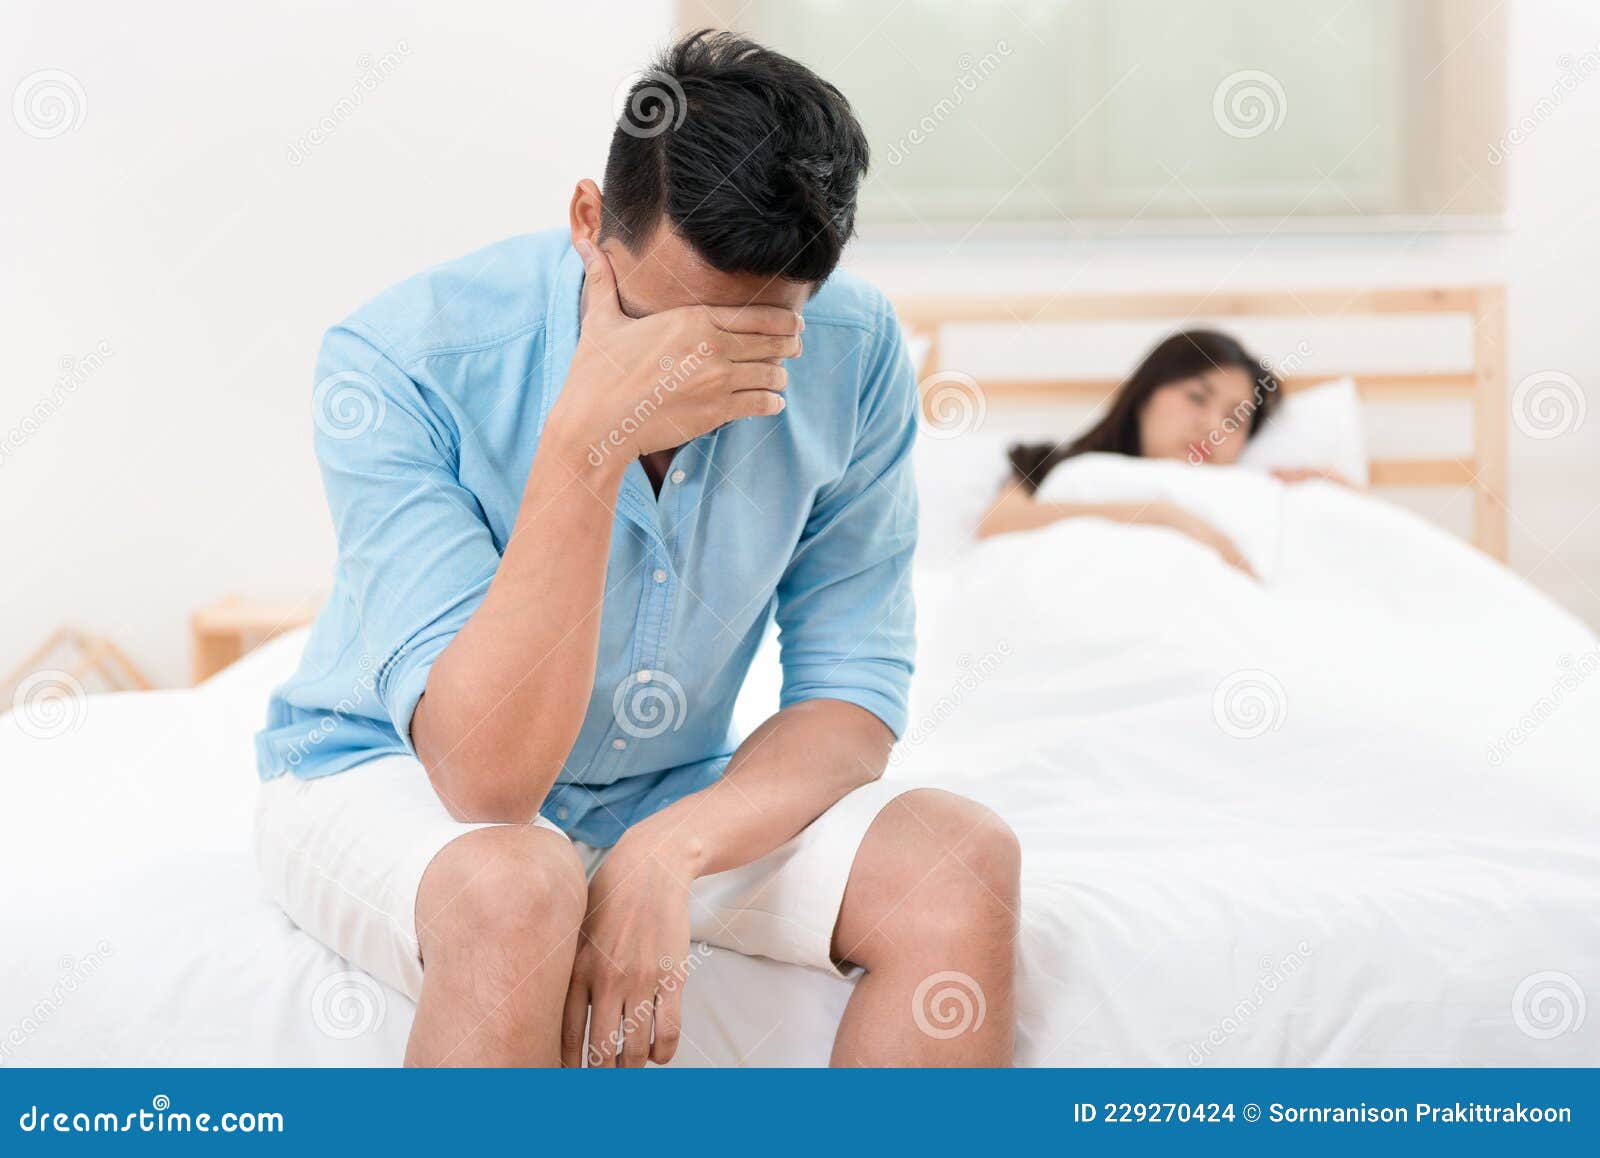 Husband Unhappy and Disappointed Stock Photo picture picture